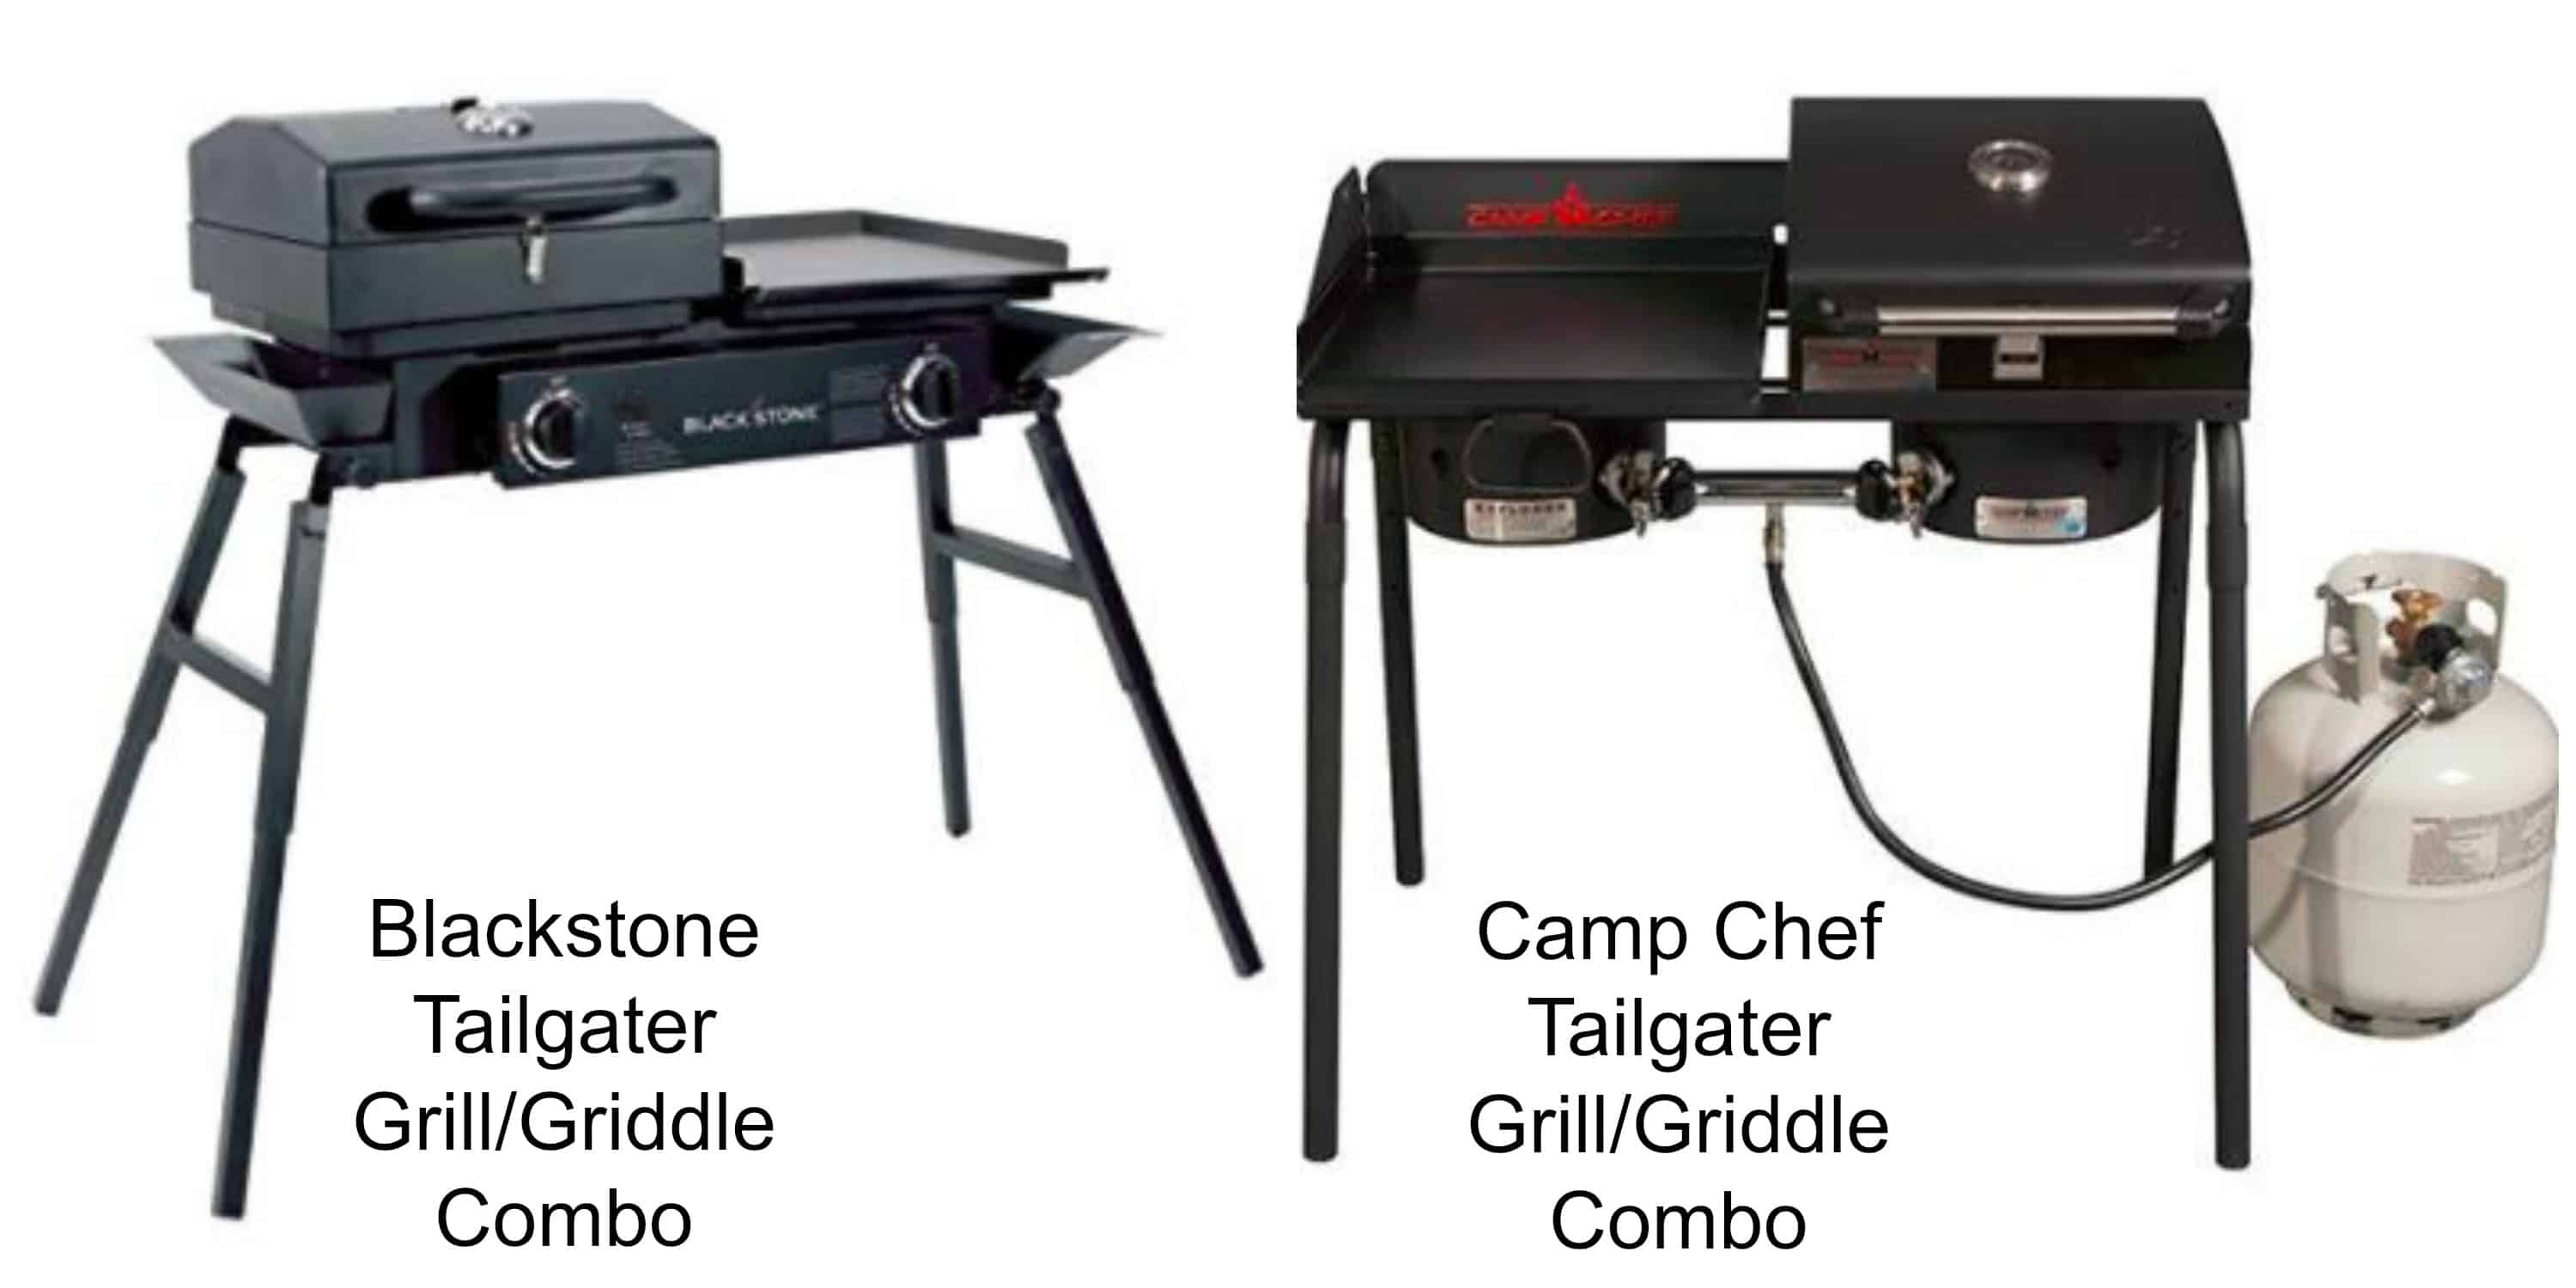 Blackstone Tailgater vs Camp Chef: One Has A Better Griddle